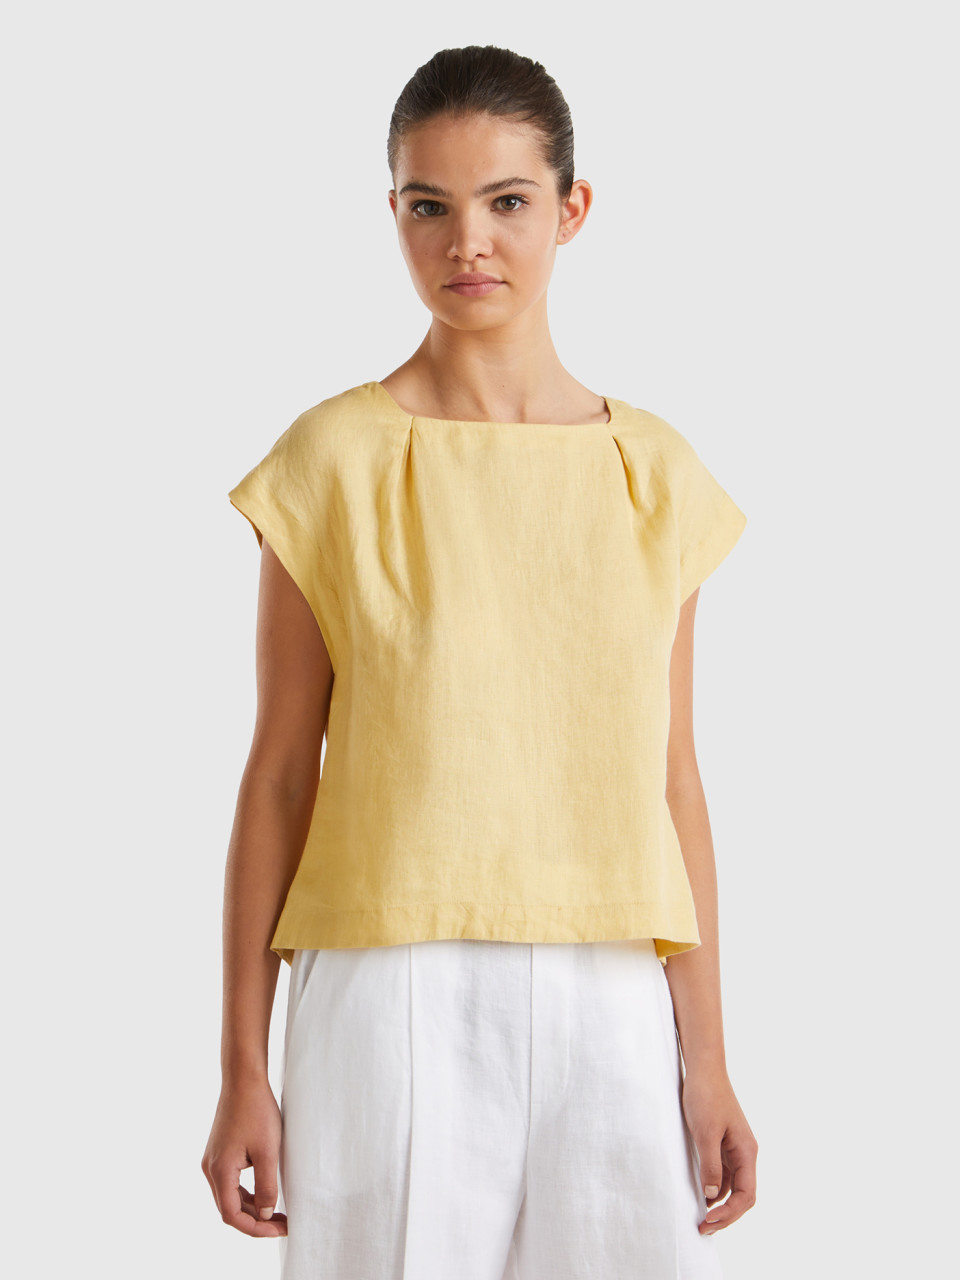 Benetton, Square Neck Blouse In Pure Linen, Yellow, Women